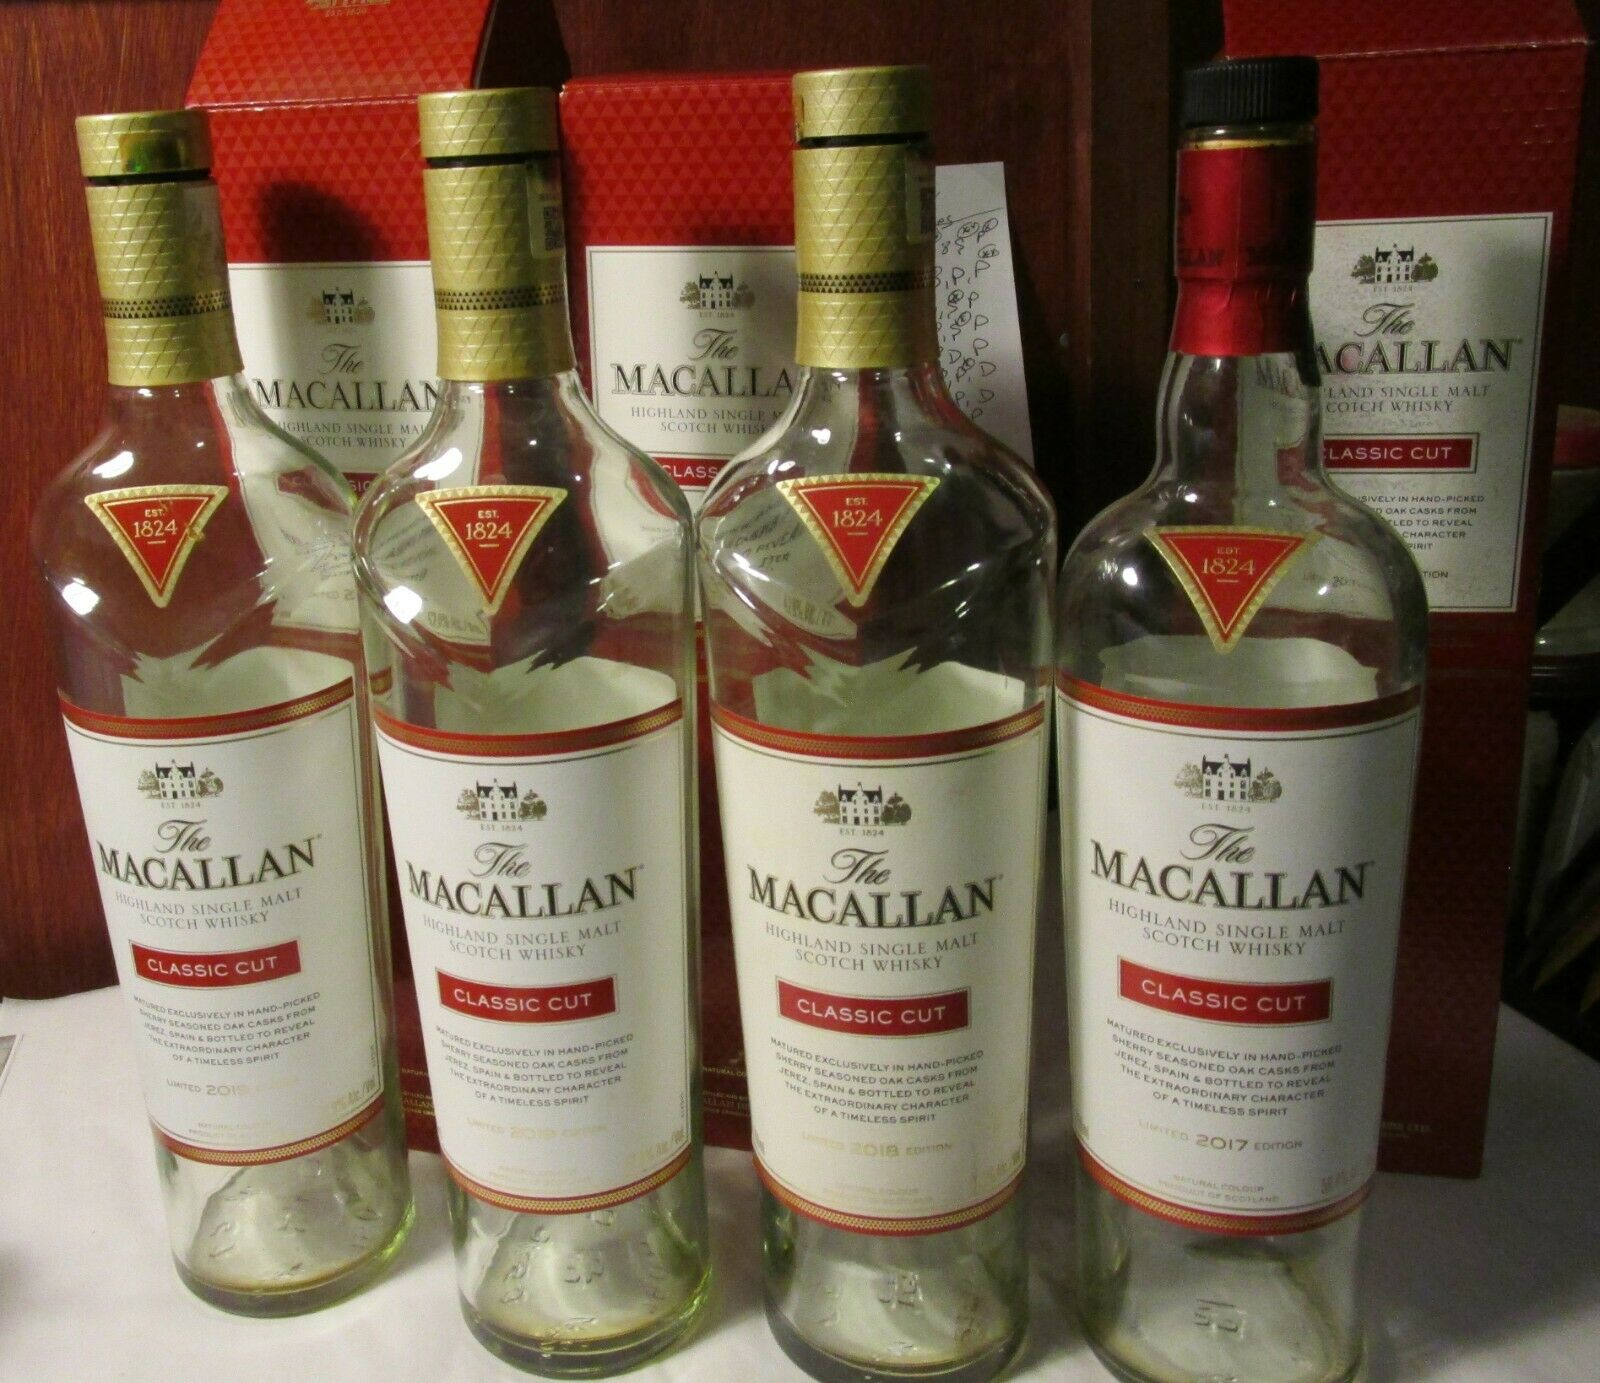 4 Macallan Classic Cut Bottles 2017 2018 and 2019 Scotch Whisky Whiskey